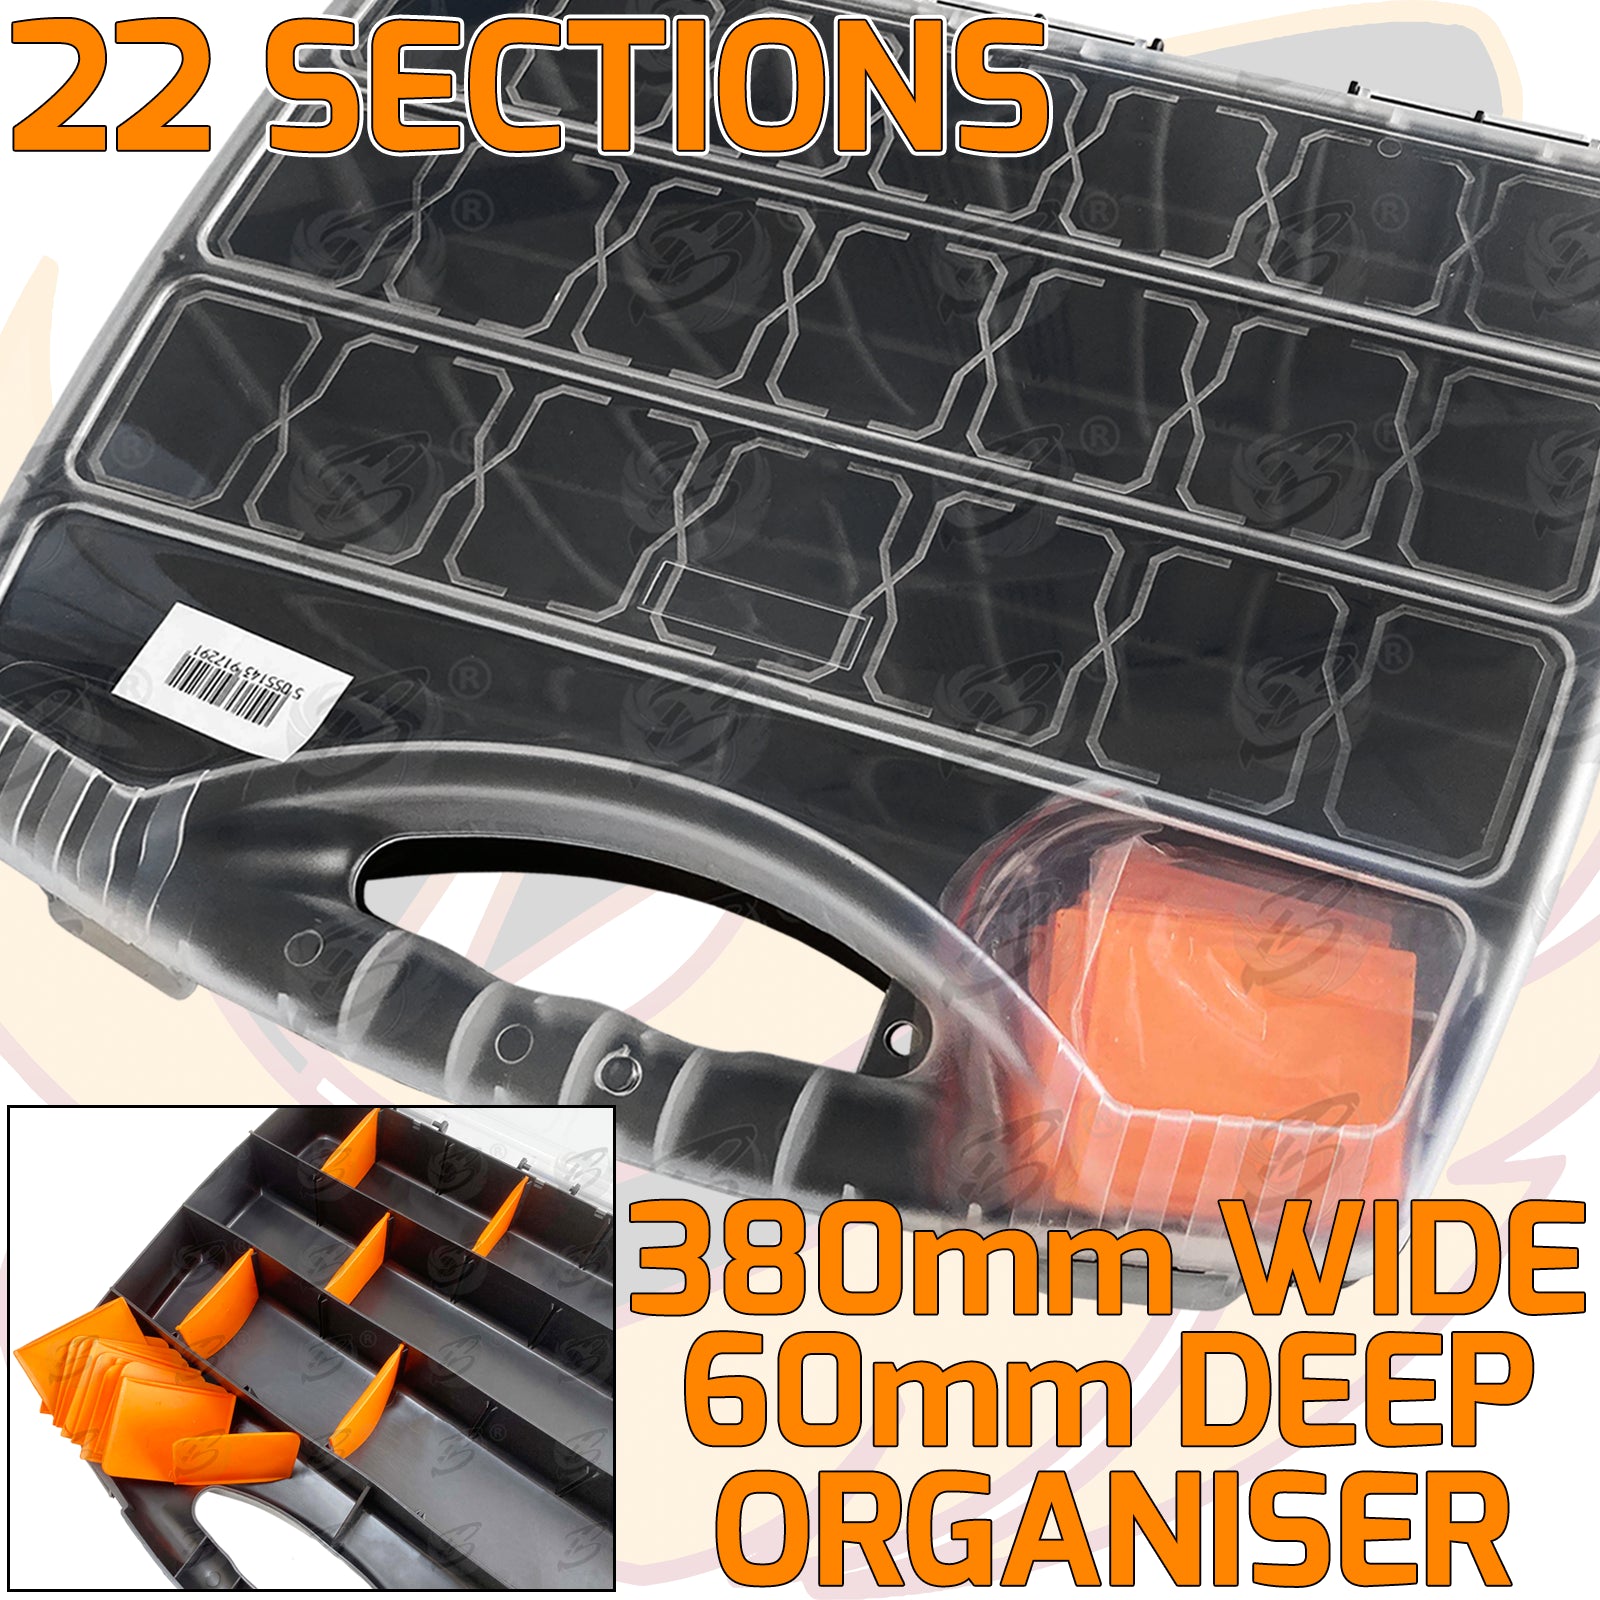 TOOLZONE DIY ORGANISER 22 COMPARTMENTS ( 380MM WIDE )